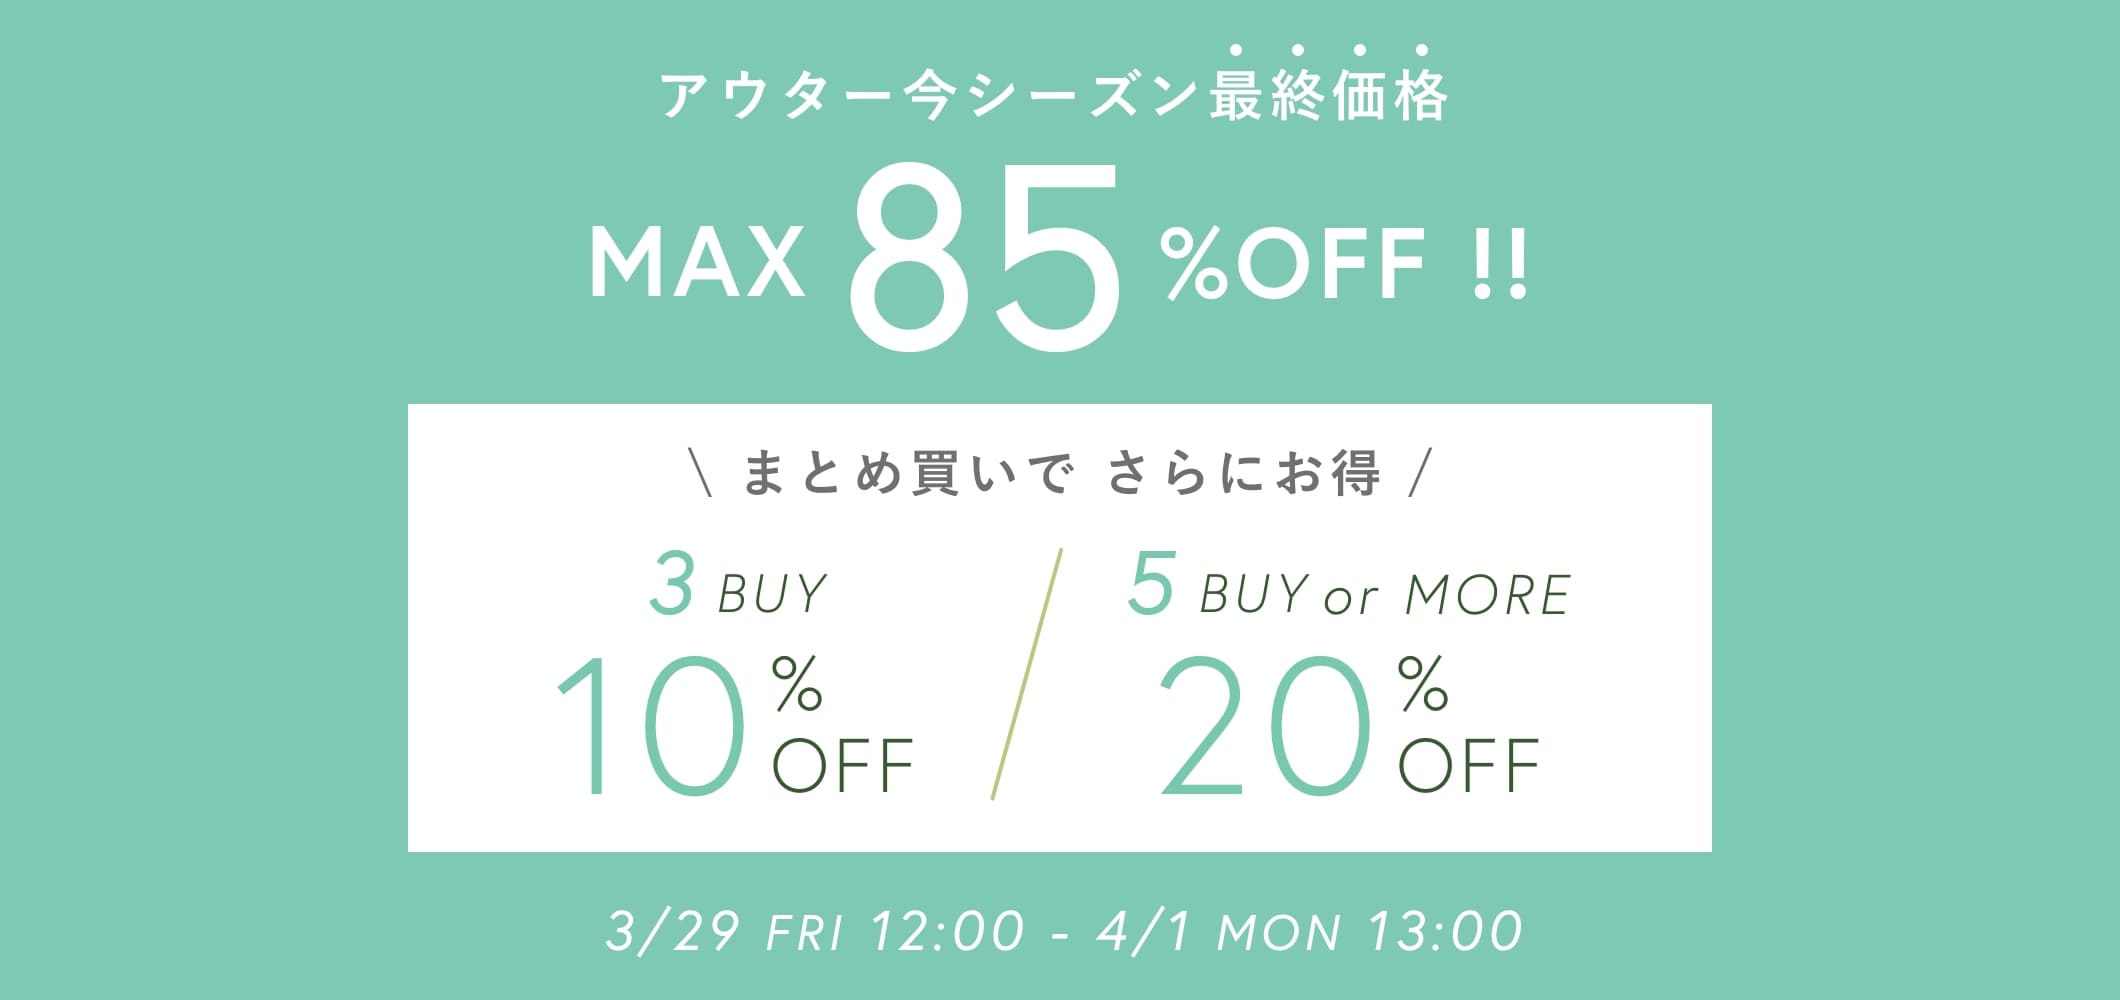 【PAL GROUP OUTLET限定】3BUY10%OFF・5BUYmore20％OFF！